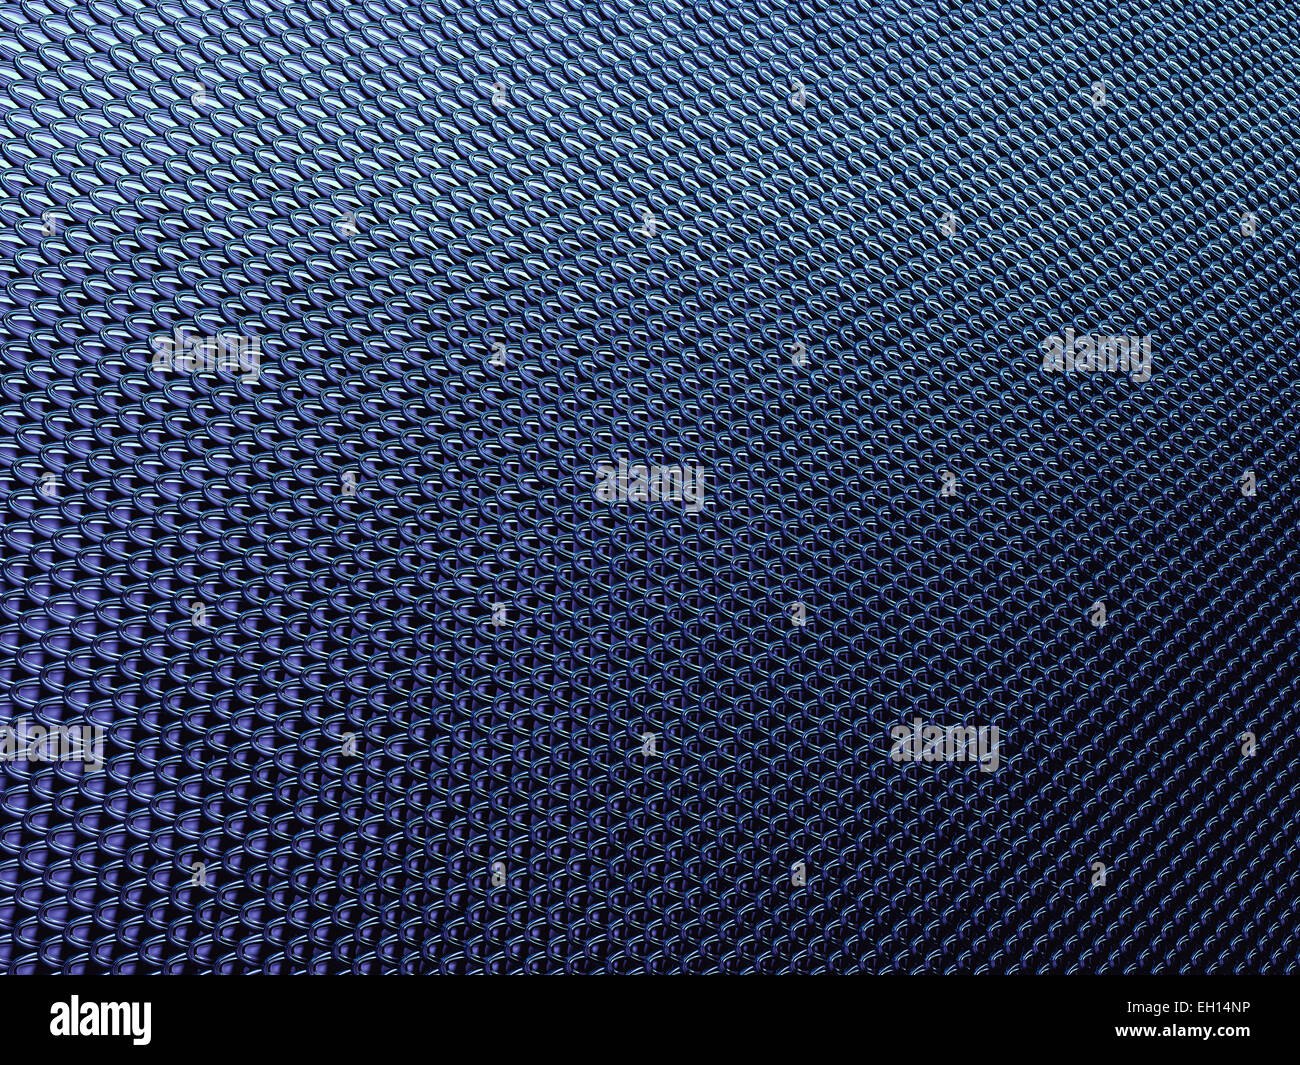 Blue fish Scales textured material or background Stock Photo